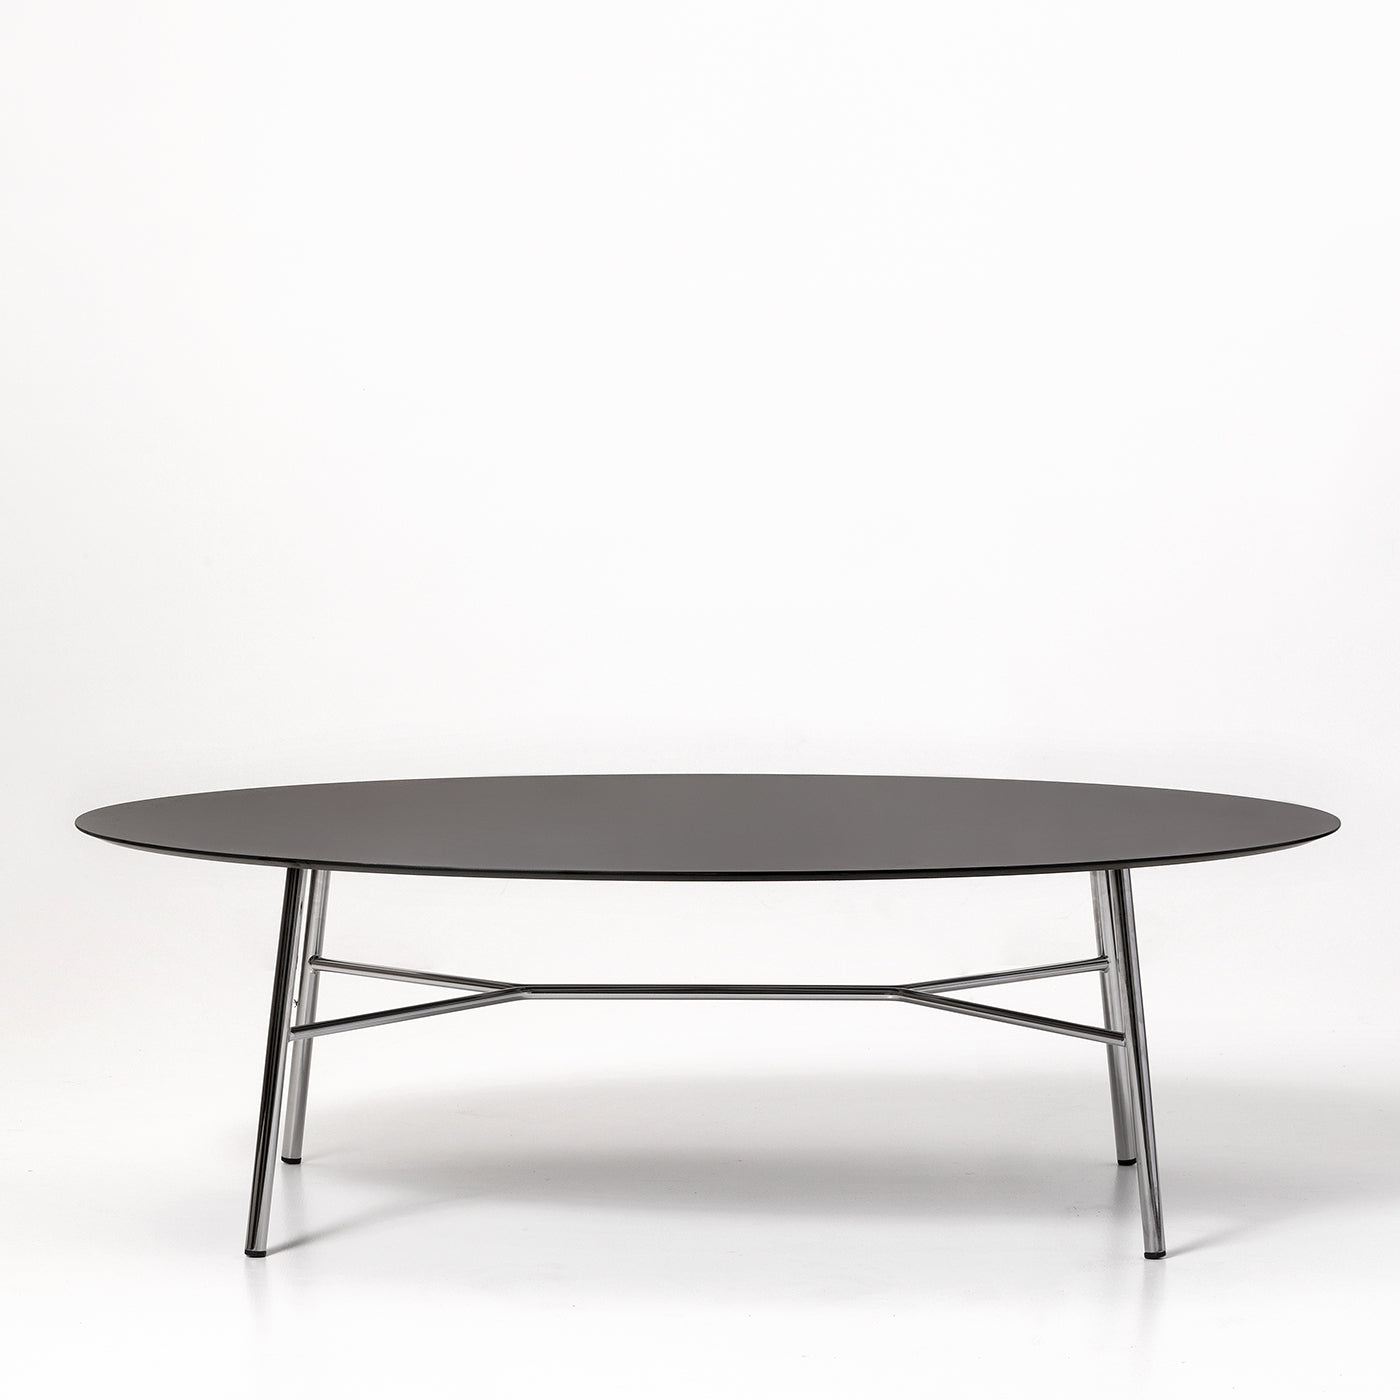 0128/S Yuki Oval Coffee Table with HPL Black Top by Ep Studio - Alternative view 1